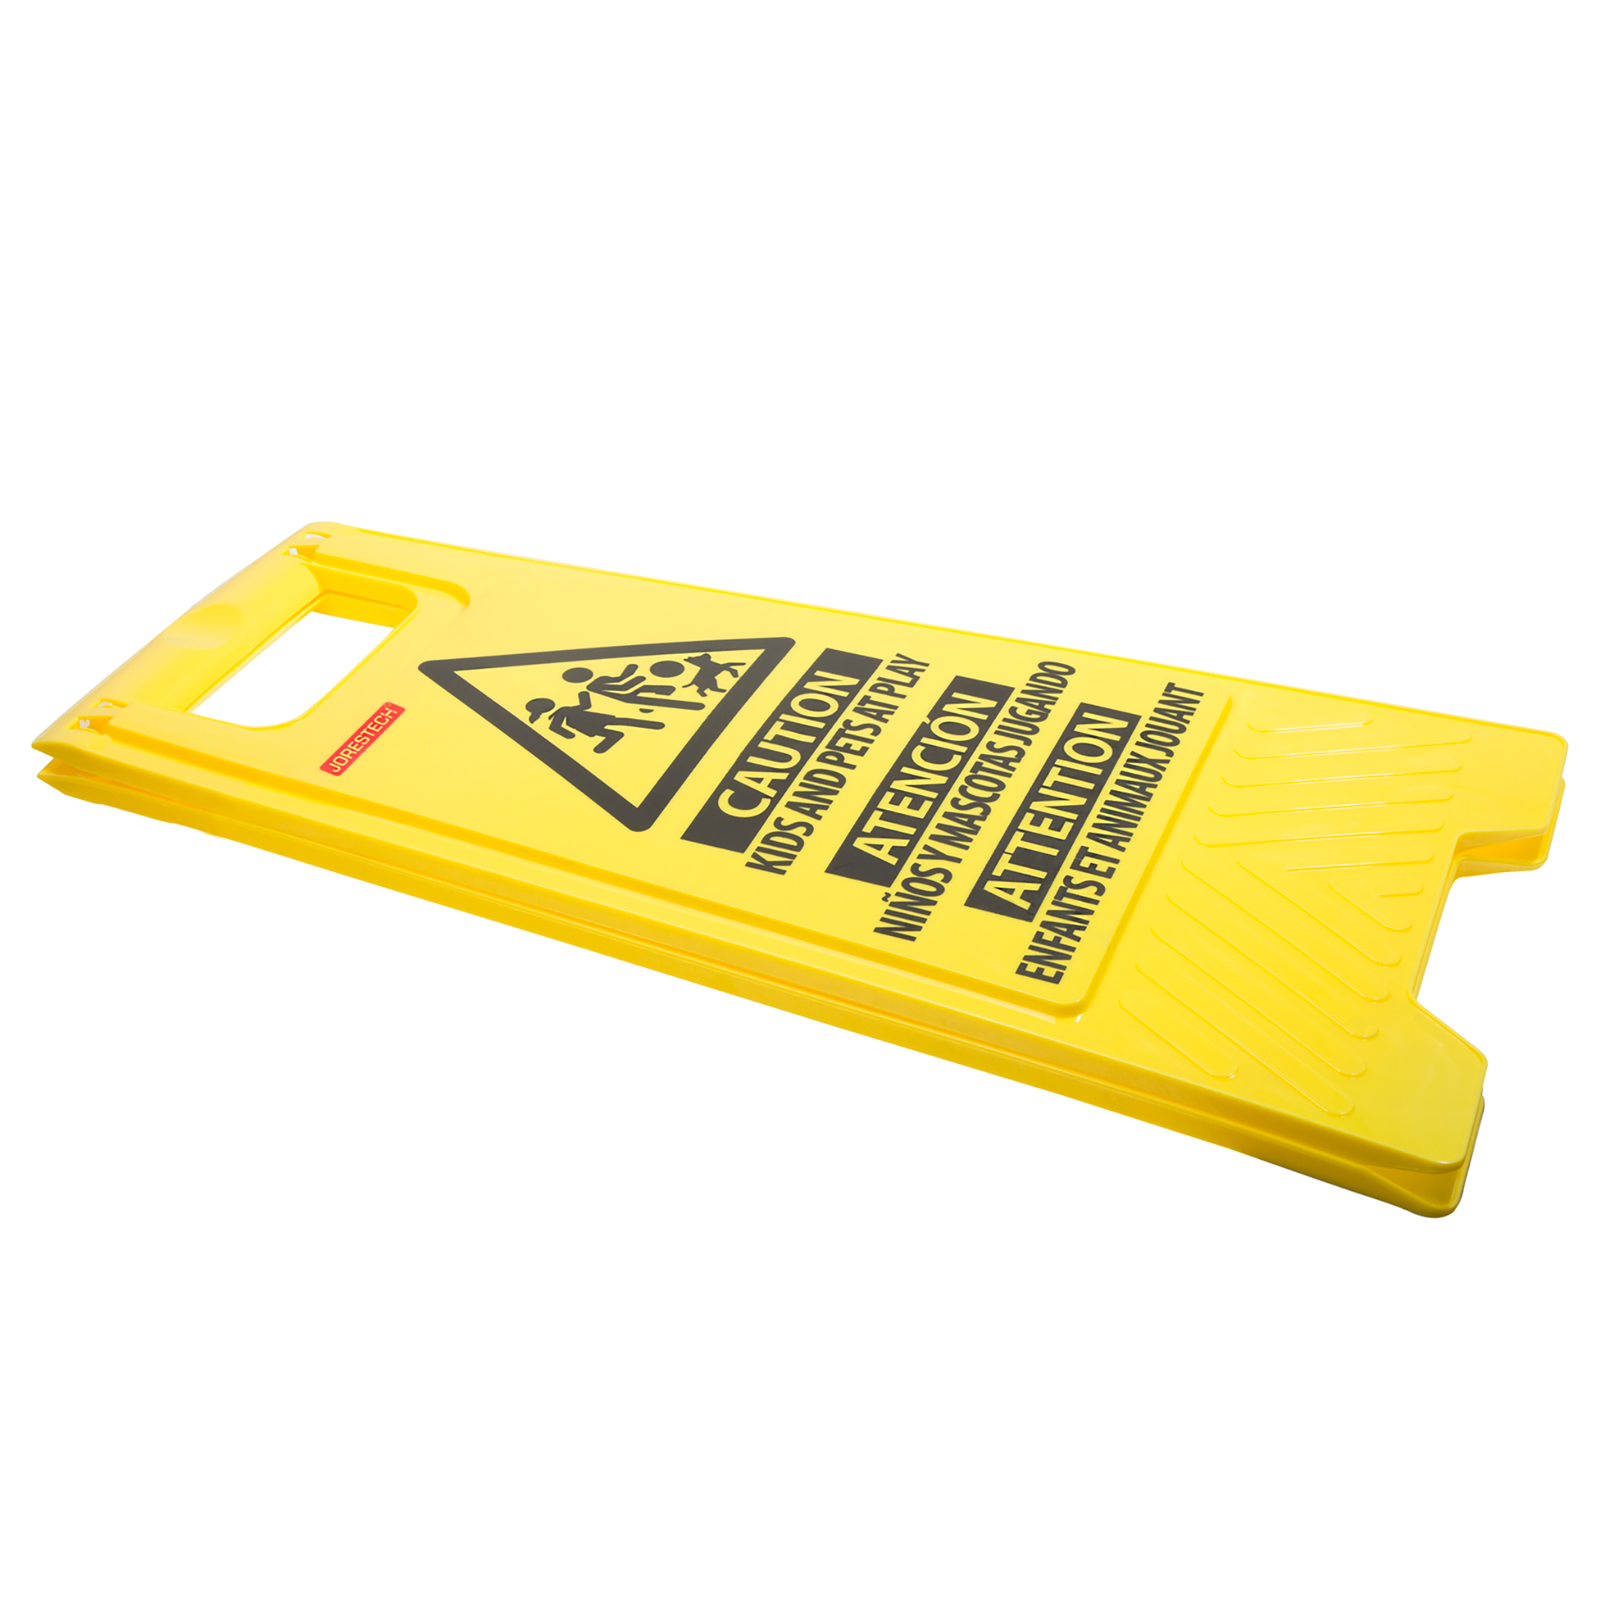 Two sided folding kids at play caution stand that has been folded for storage